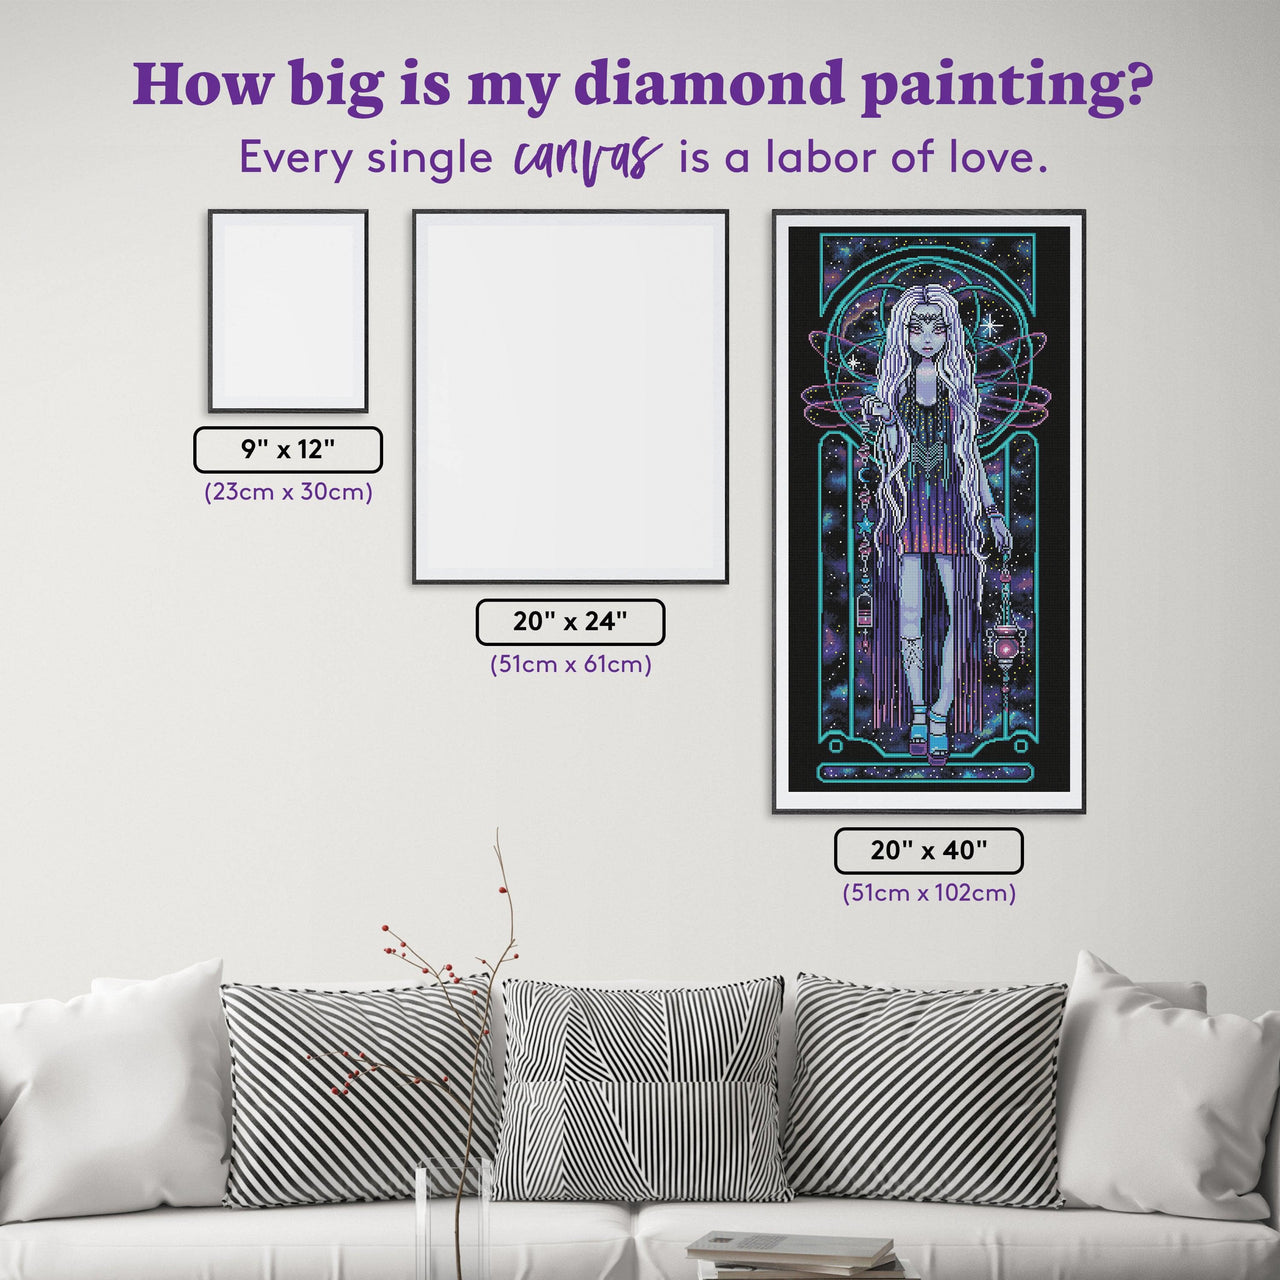 Diamond Painting Delphi 20" x 40" (51cm x 102cm) / Round with 37 Colors including 4 ABs / 65,703